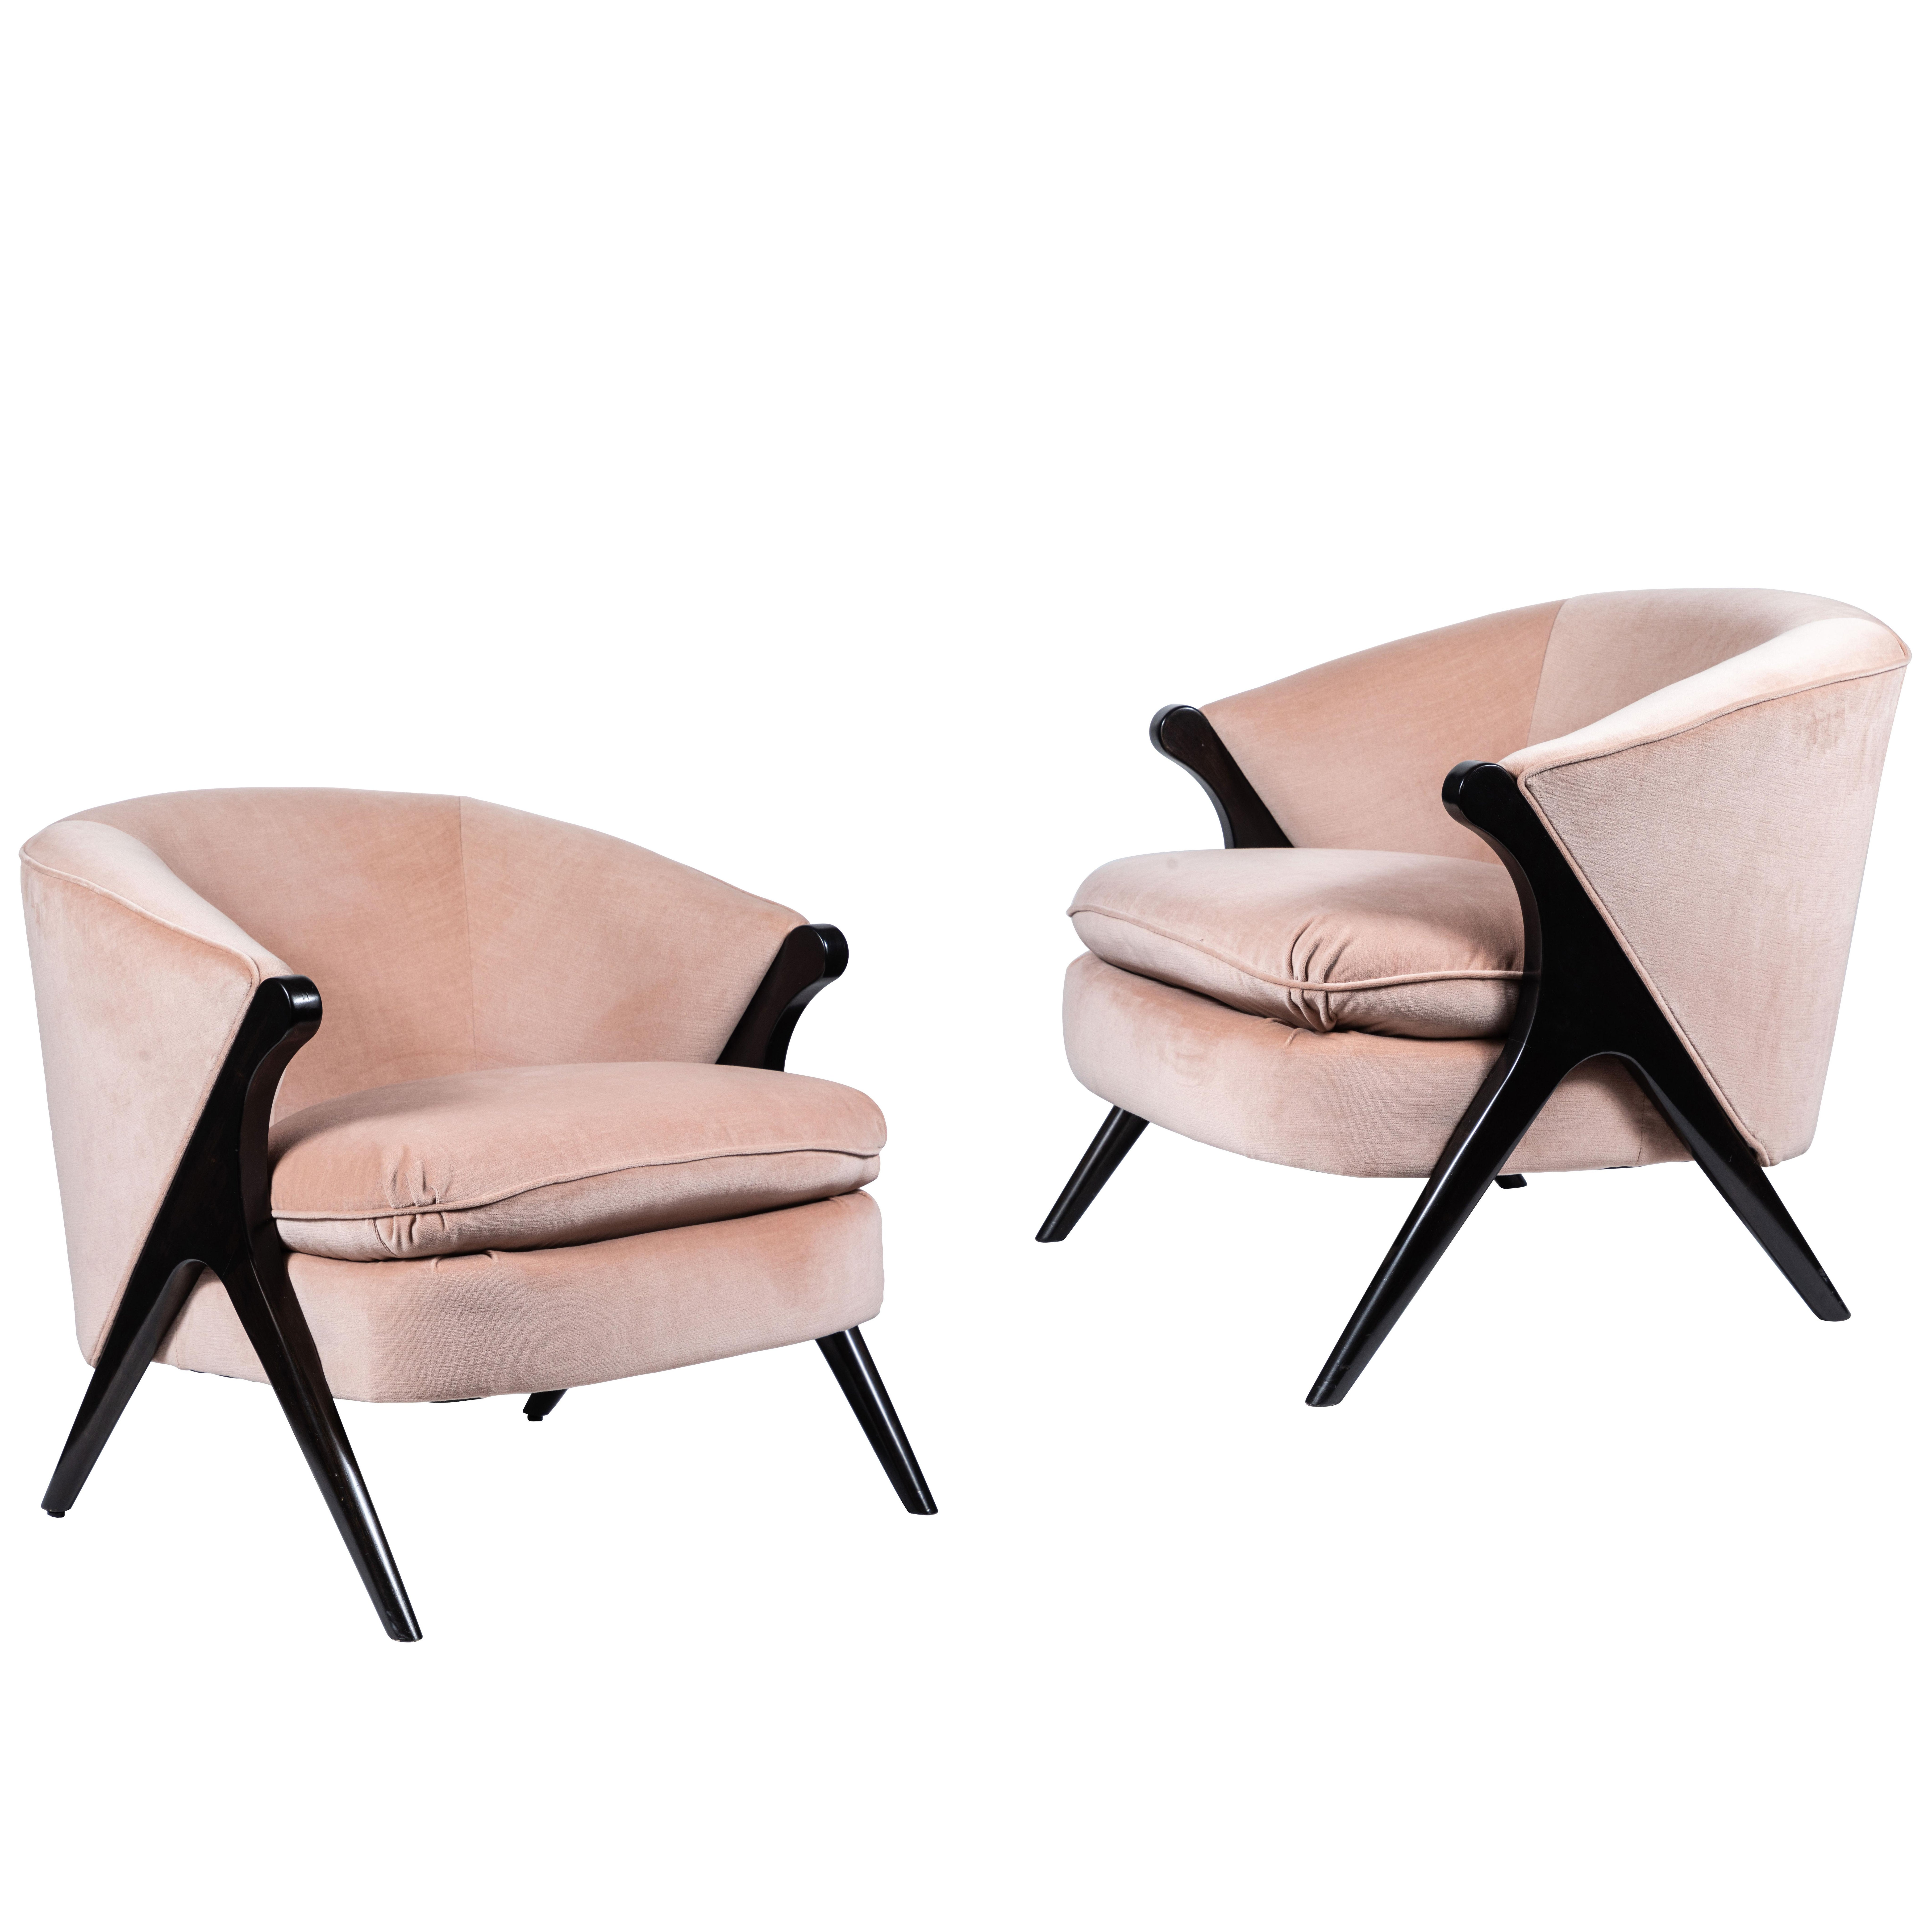 Pair of Midcentury Chairs in the Manner of Karpen